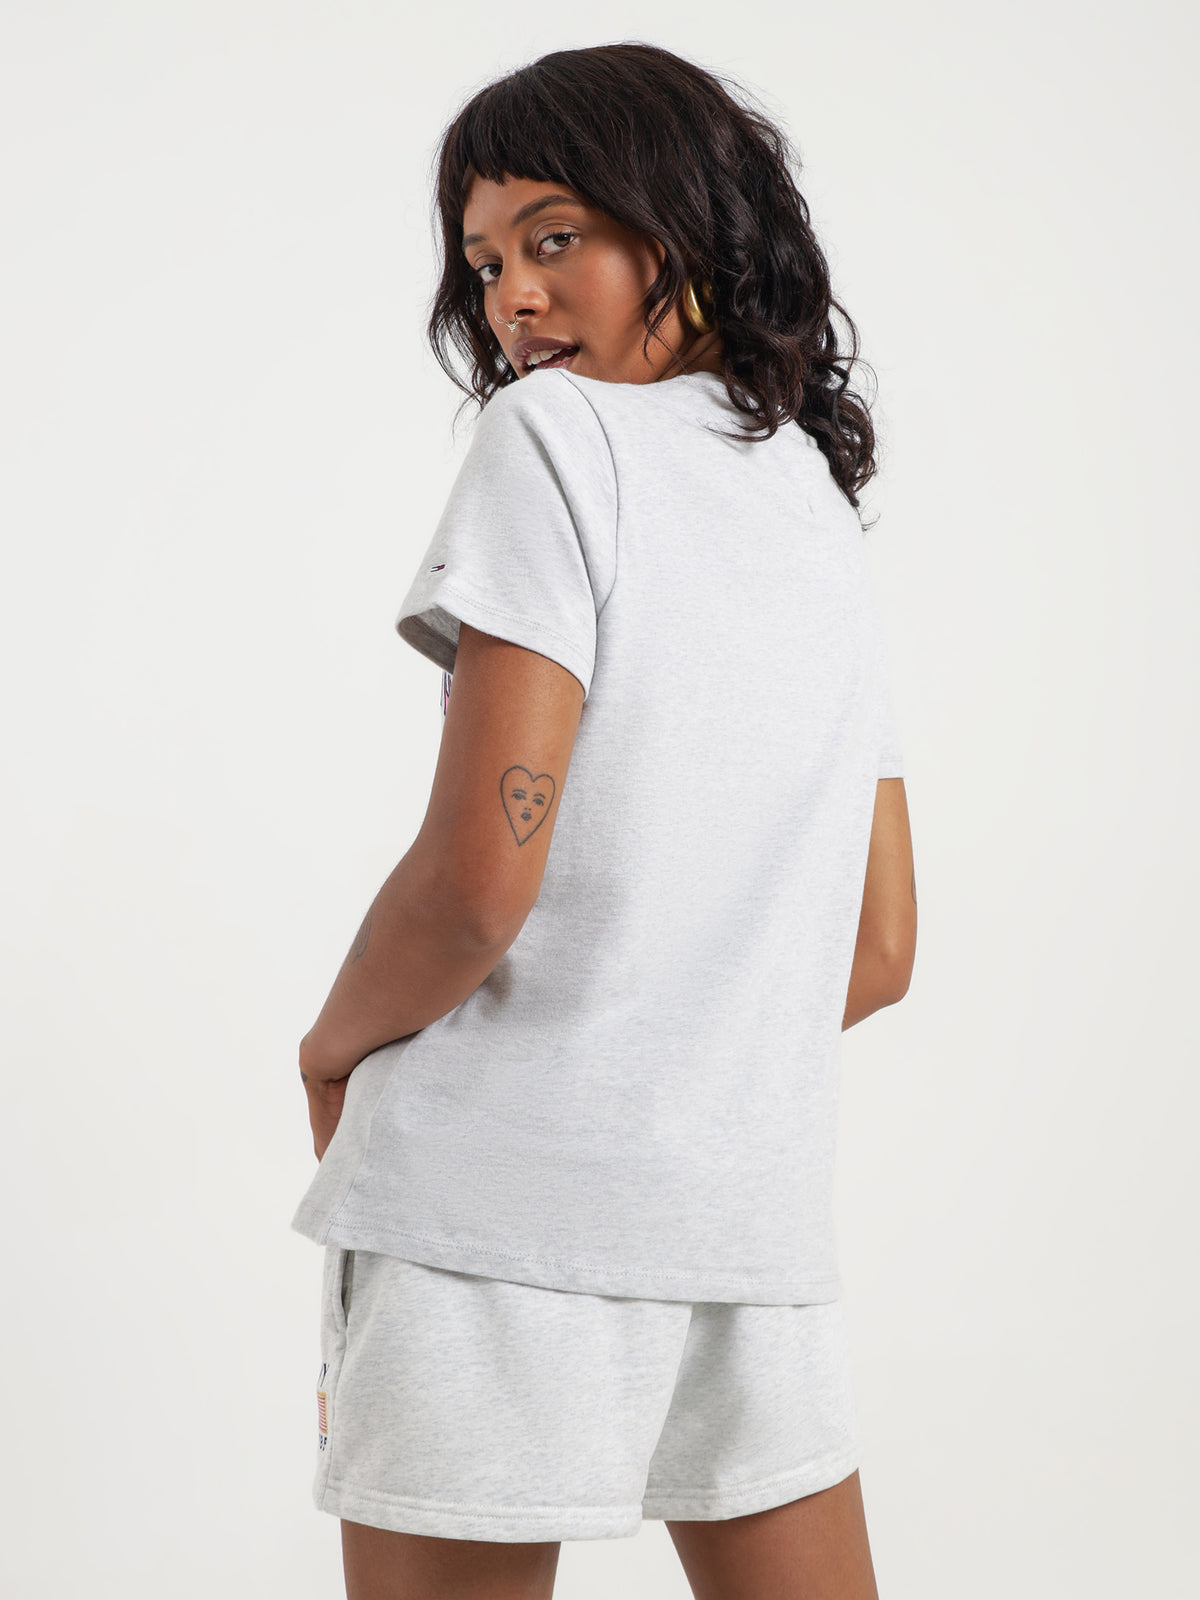 Relaxed Collegiate Logo T-Shirt in Silver Grey